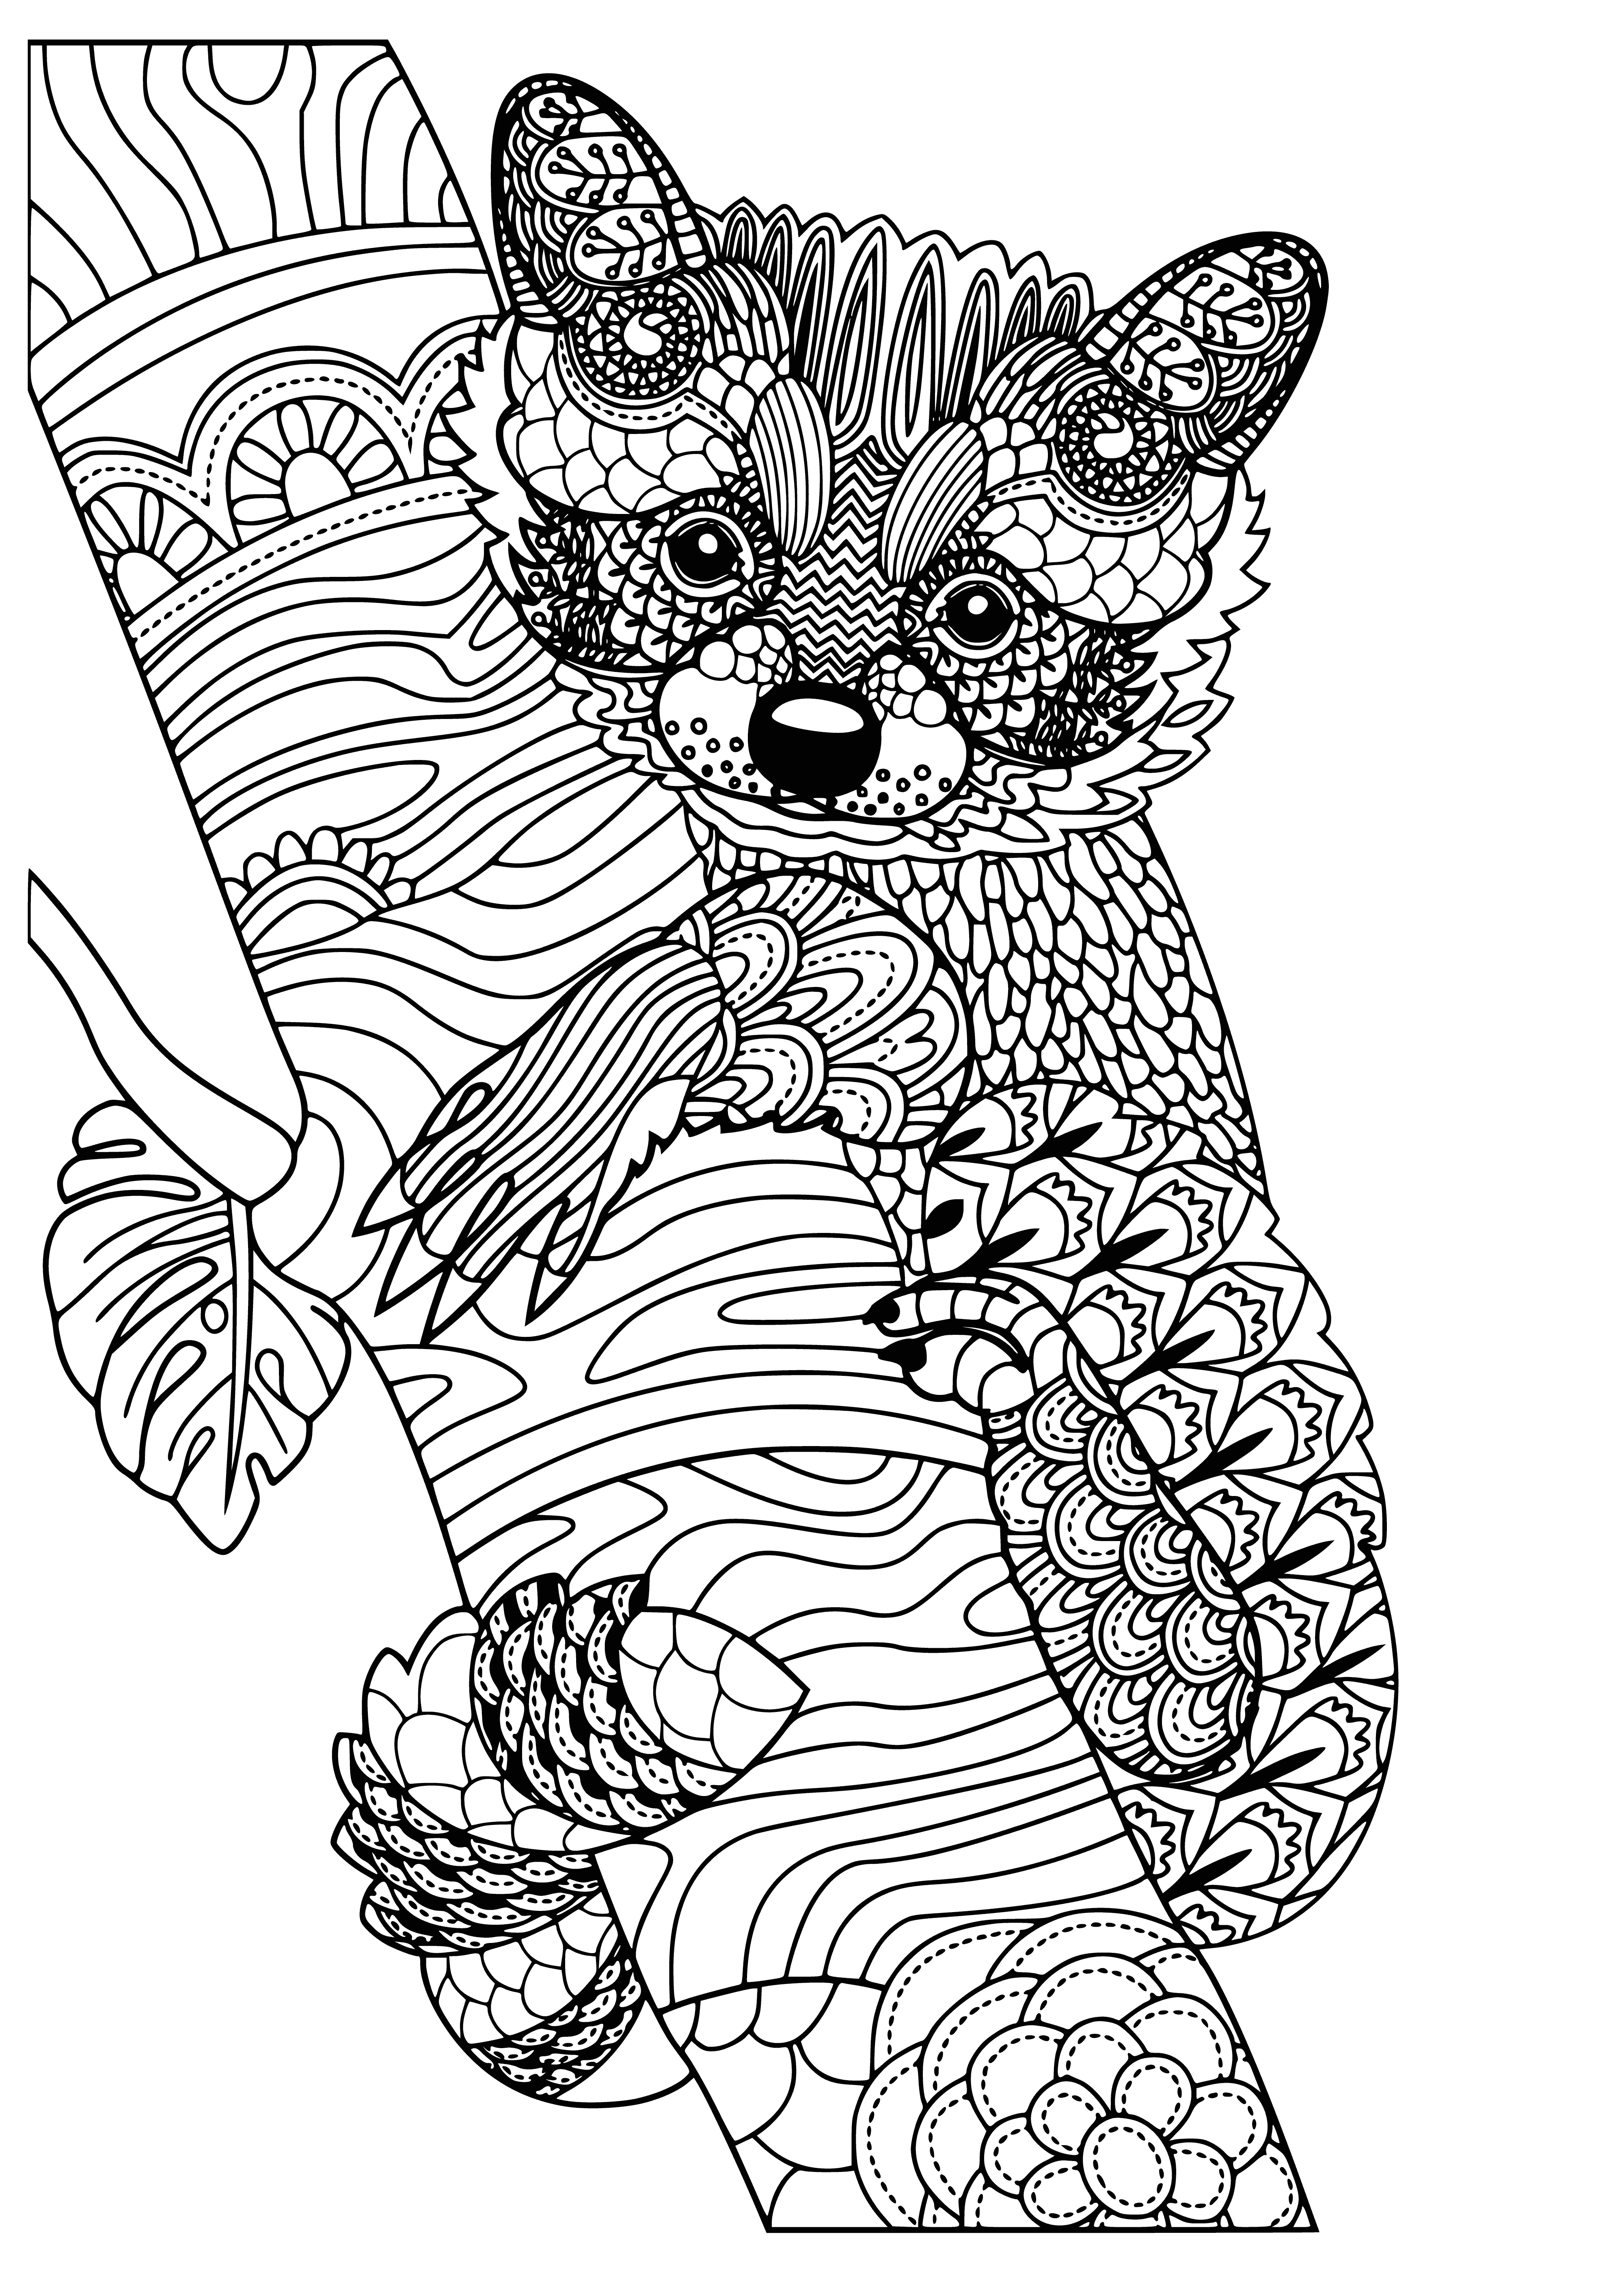 coloring page: Small ant-like creature perched on blade of grass with large head, black body, white belly and two black wings.